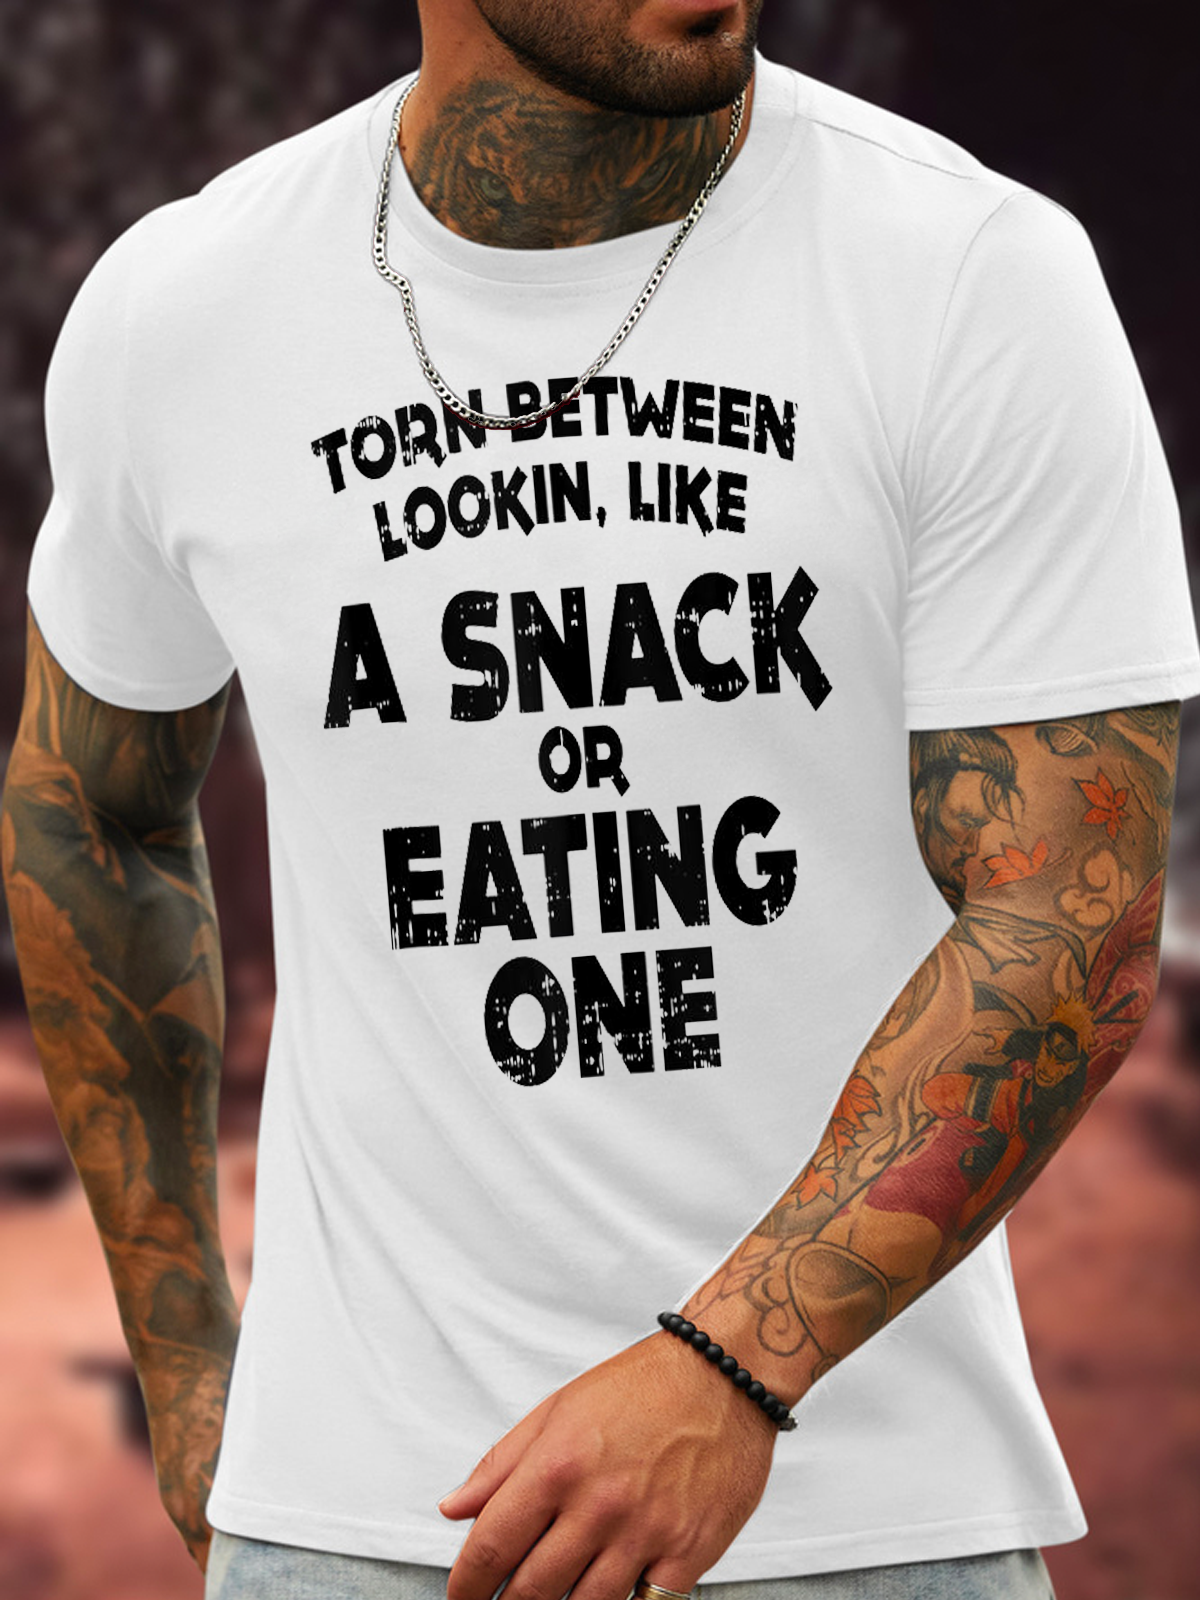 Cotton Torn Between Wanting A Snack Funny Casual T-Shirt